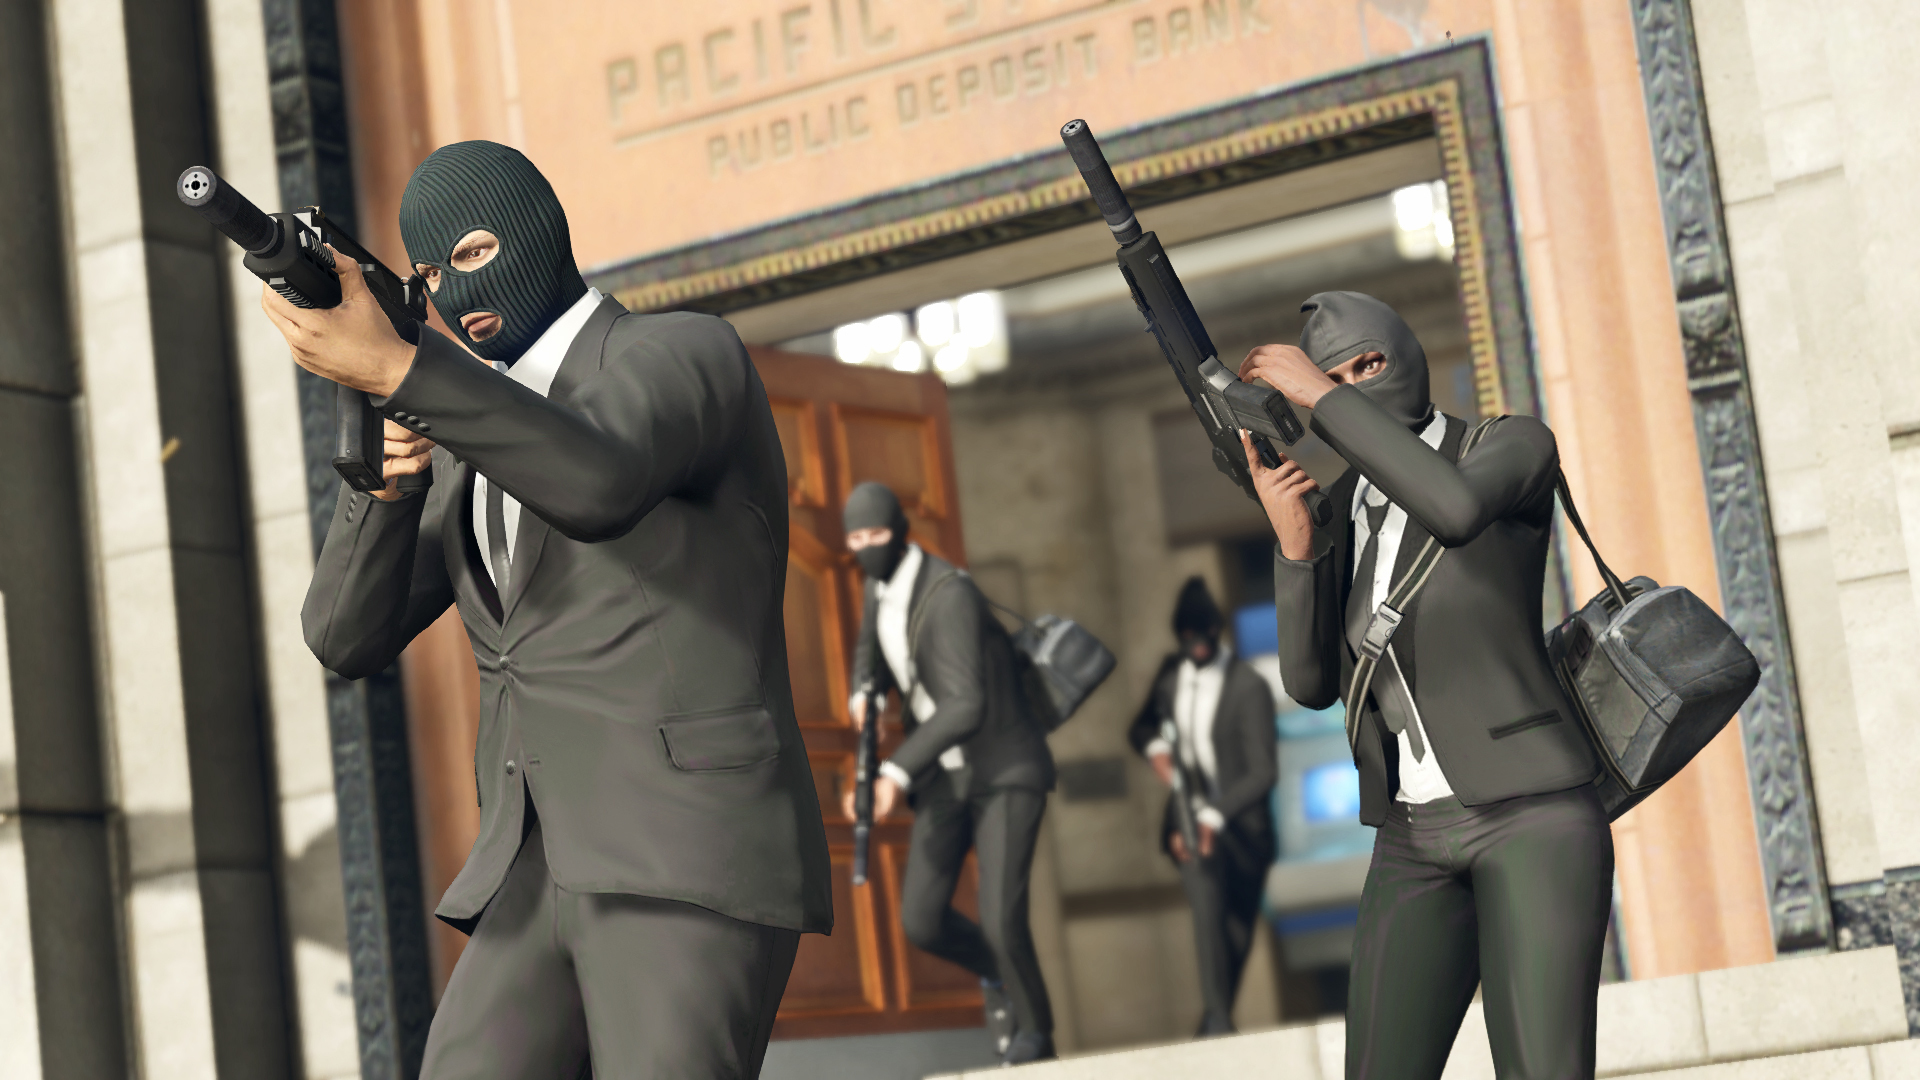 GTA 5 stock market: GTA Online players with balaclavas storm out of a bank.